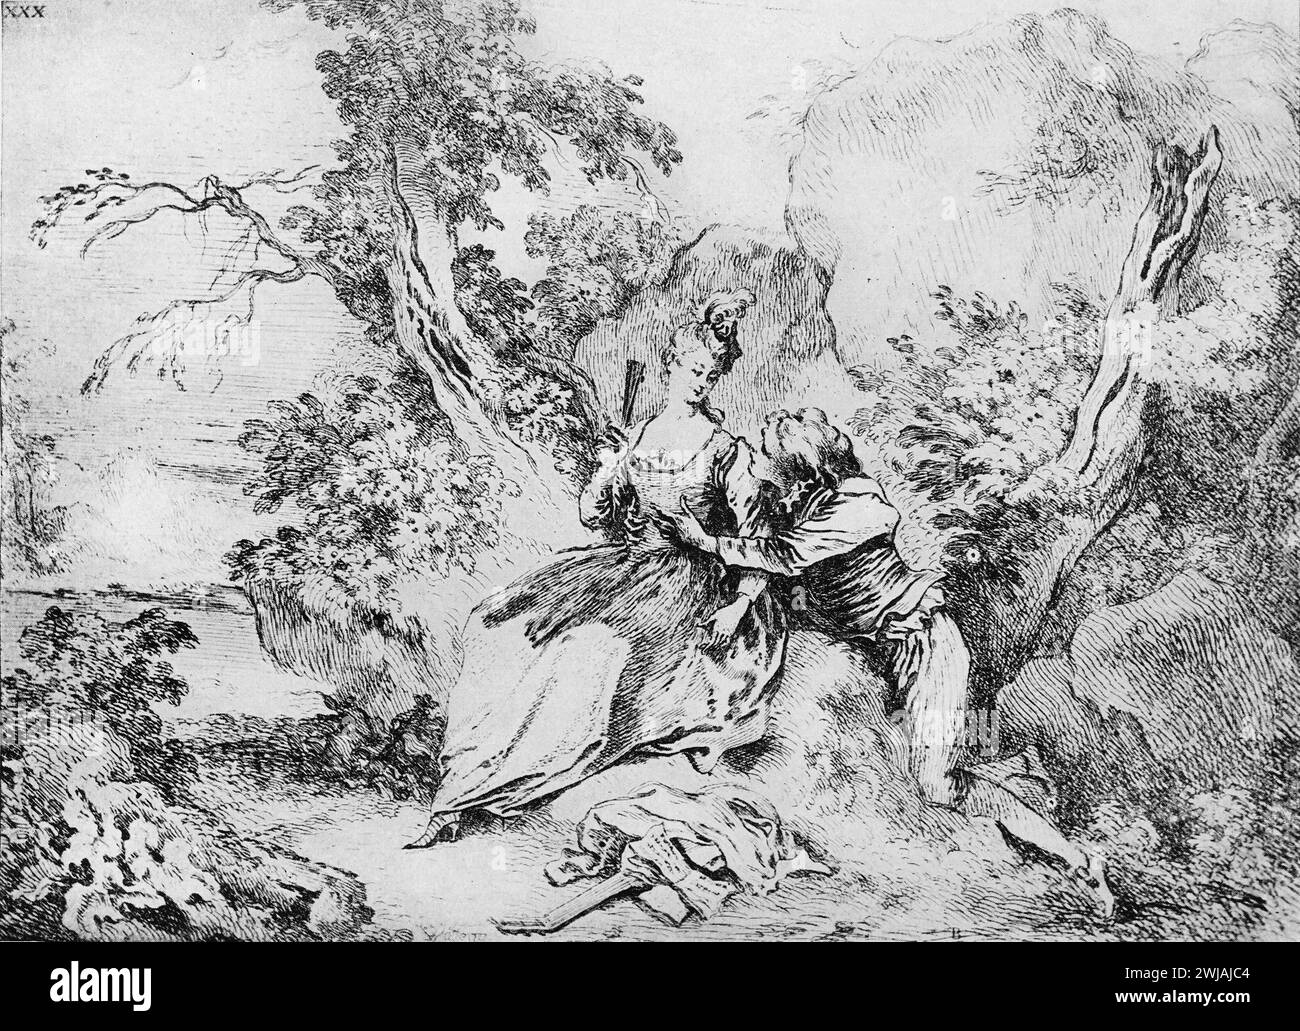 Drawings of 'A Pastoral' by French Artist, Jean-Antoine Watteau: Black and White Illustration from the Connoisseur, an Illustrated Magazine for Collectors Voll 3 (May-Aug 1902) published in London. Stock Photo